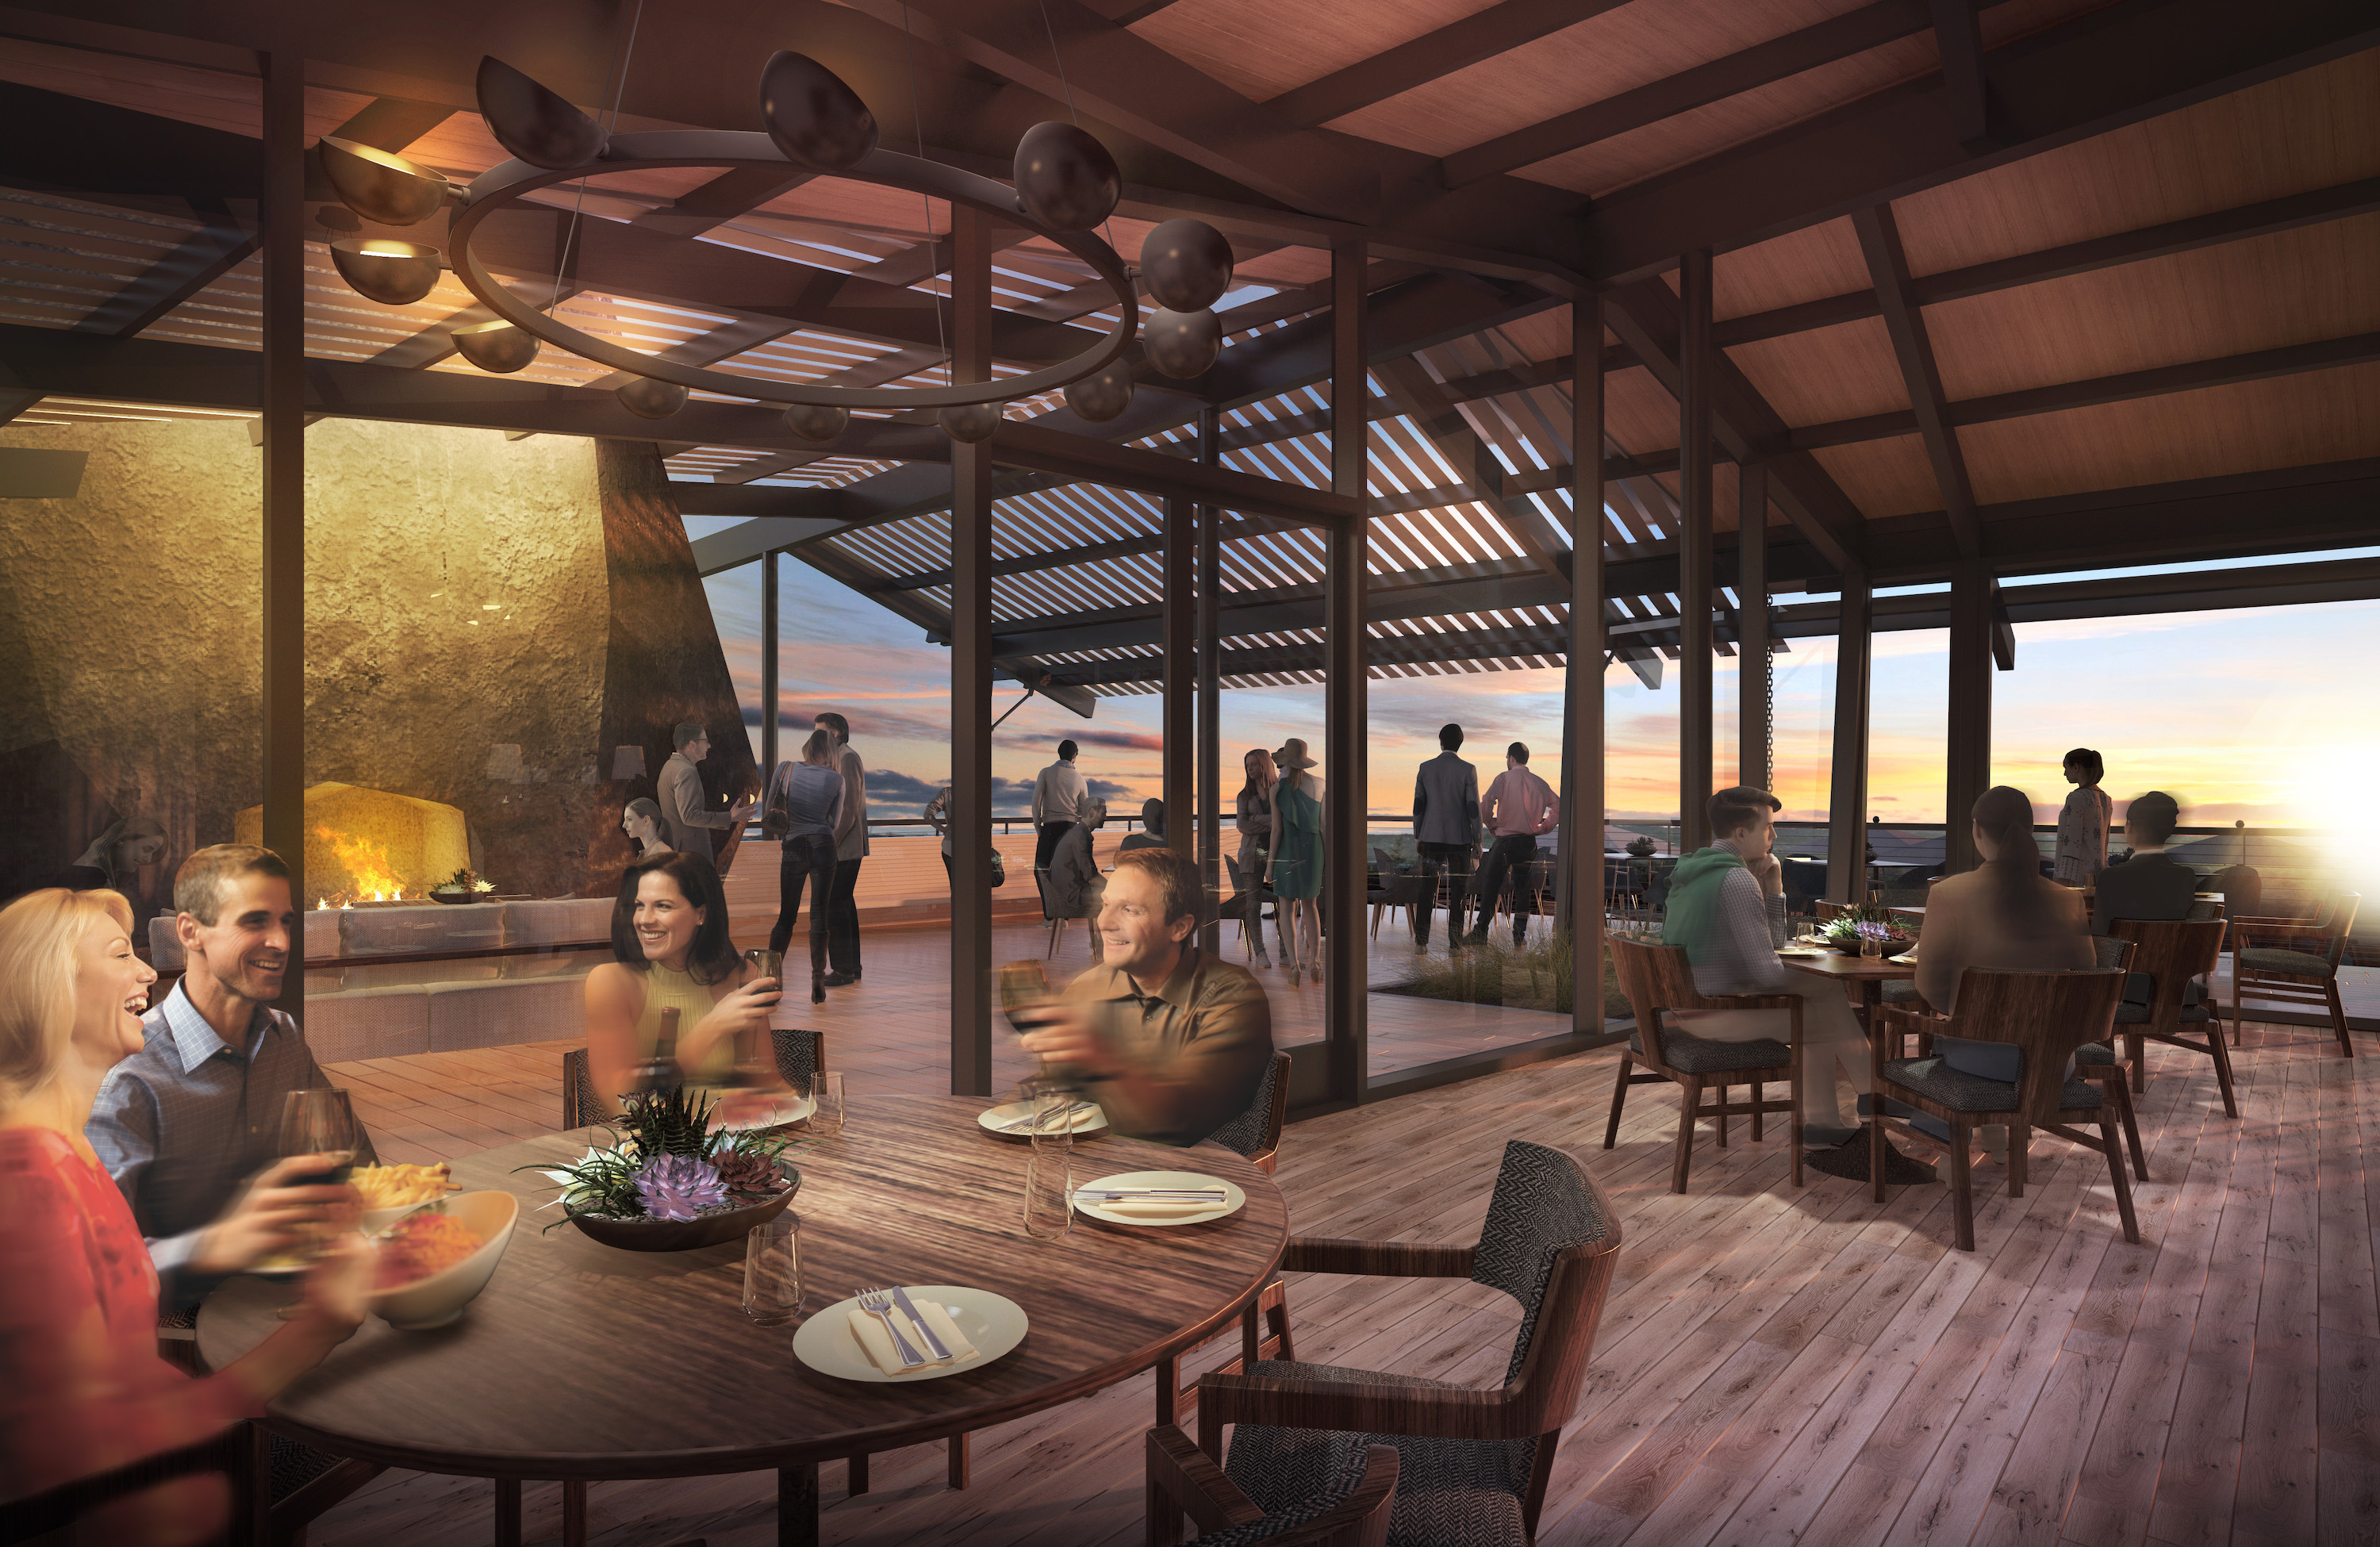 Cap Rock Members Club at Horseshoe Bay, main clubhouse interior (rendering by three)